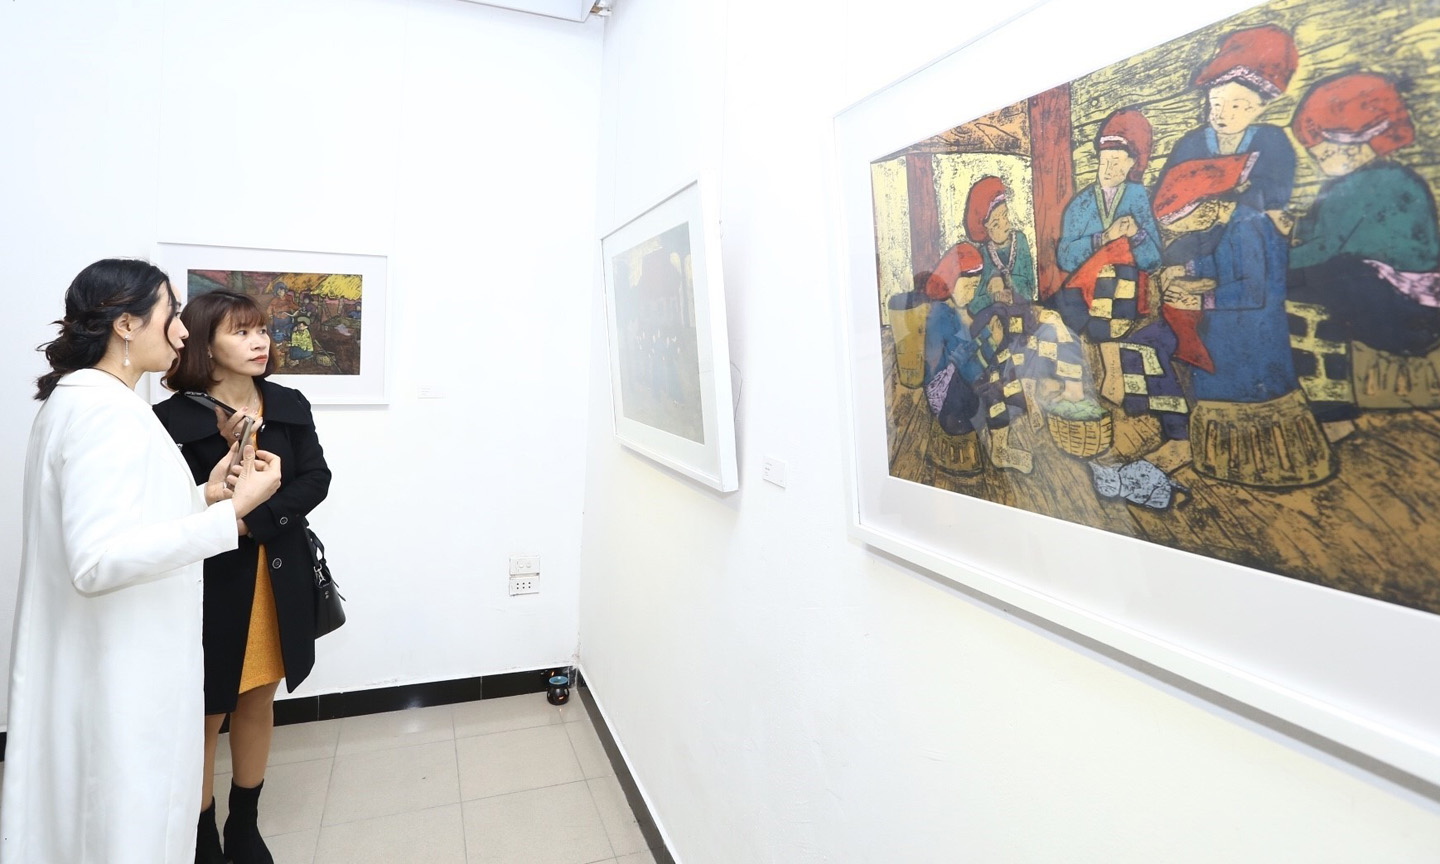 The exhibition features 70 artworks of various genres (Photo: VNA)